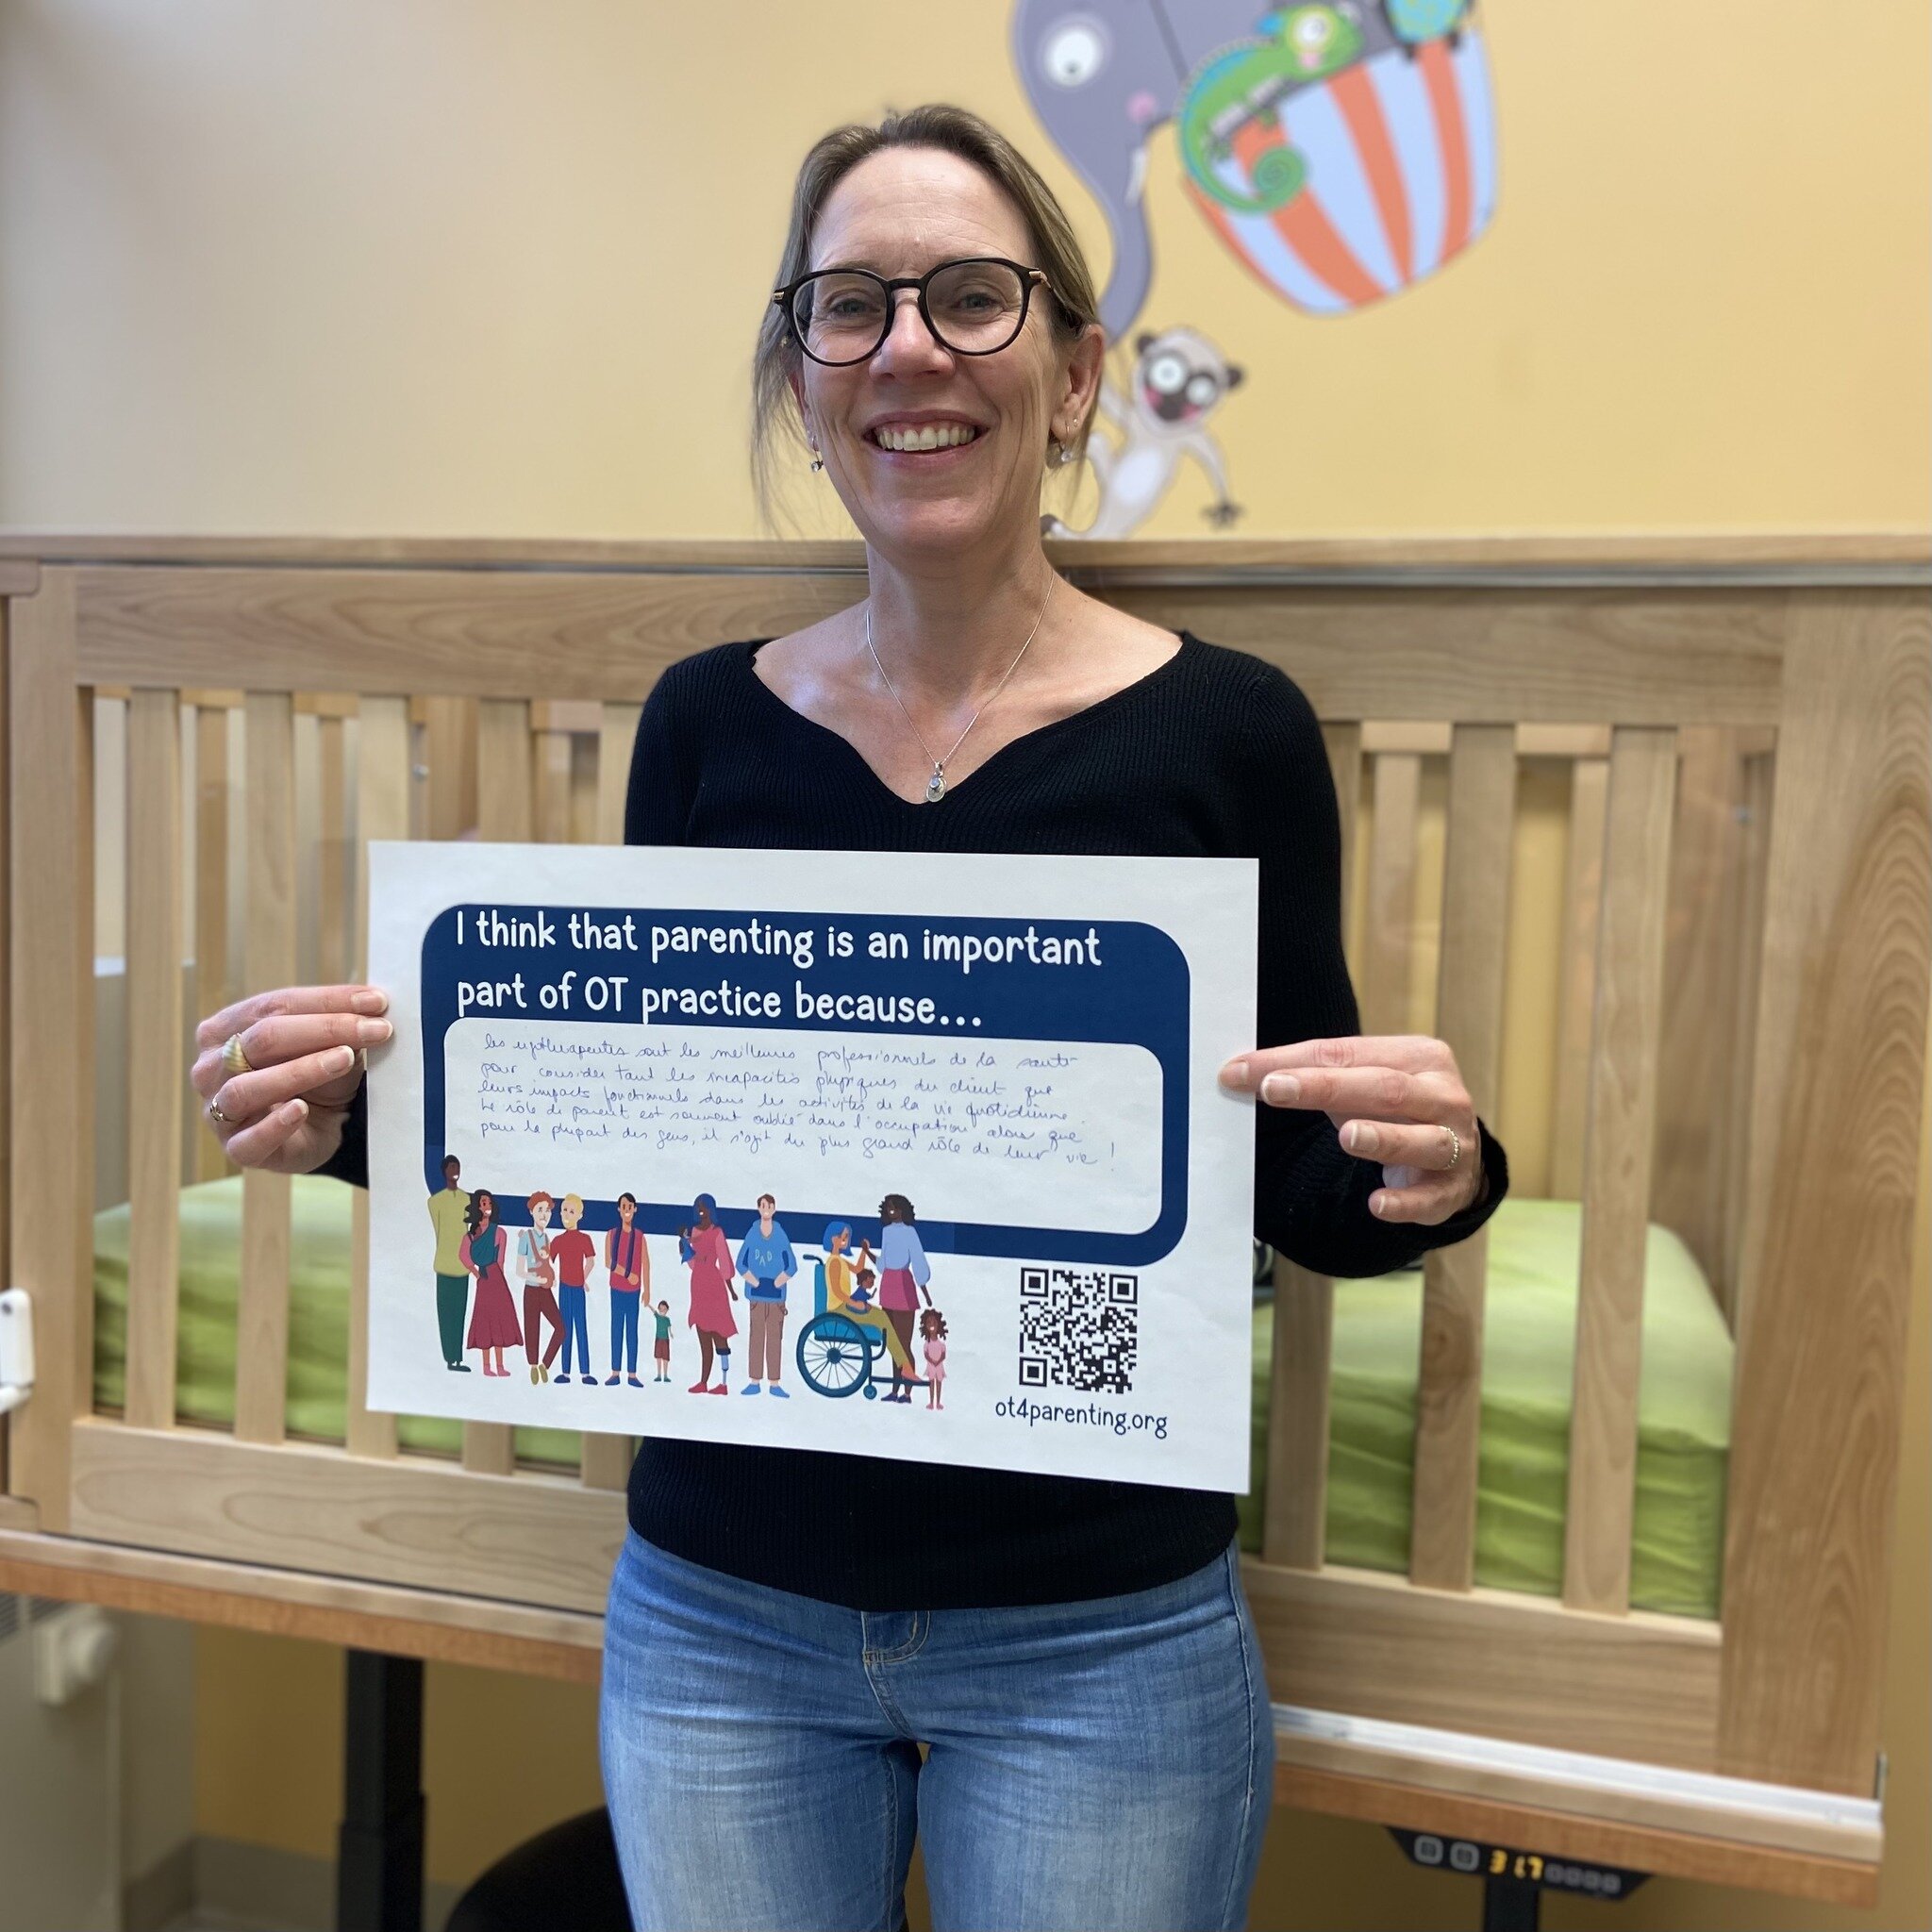 Nancy is an OT at the Parents Plus Clinic of the Centre de r&eacute;adaptation en d&eacute;ficience physique Lucie-Bruneau and she thinks that parenting is an important part of OT practice because... &quot;occupational therapists are the best health 